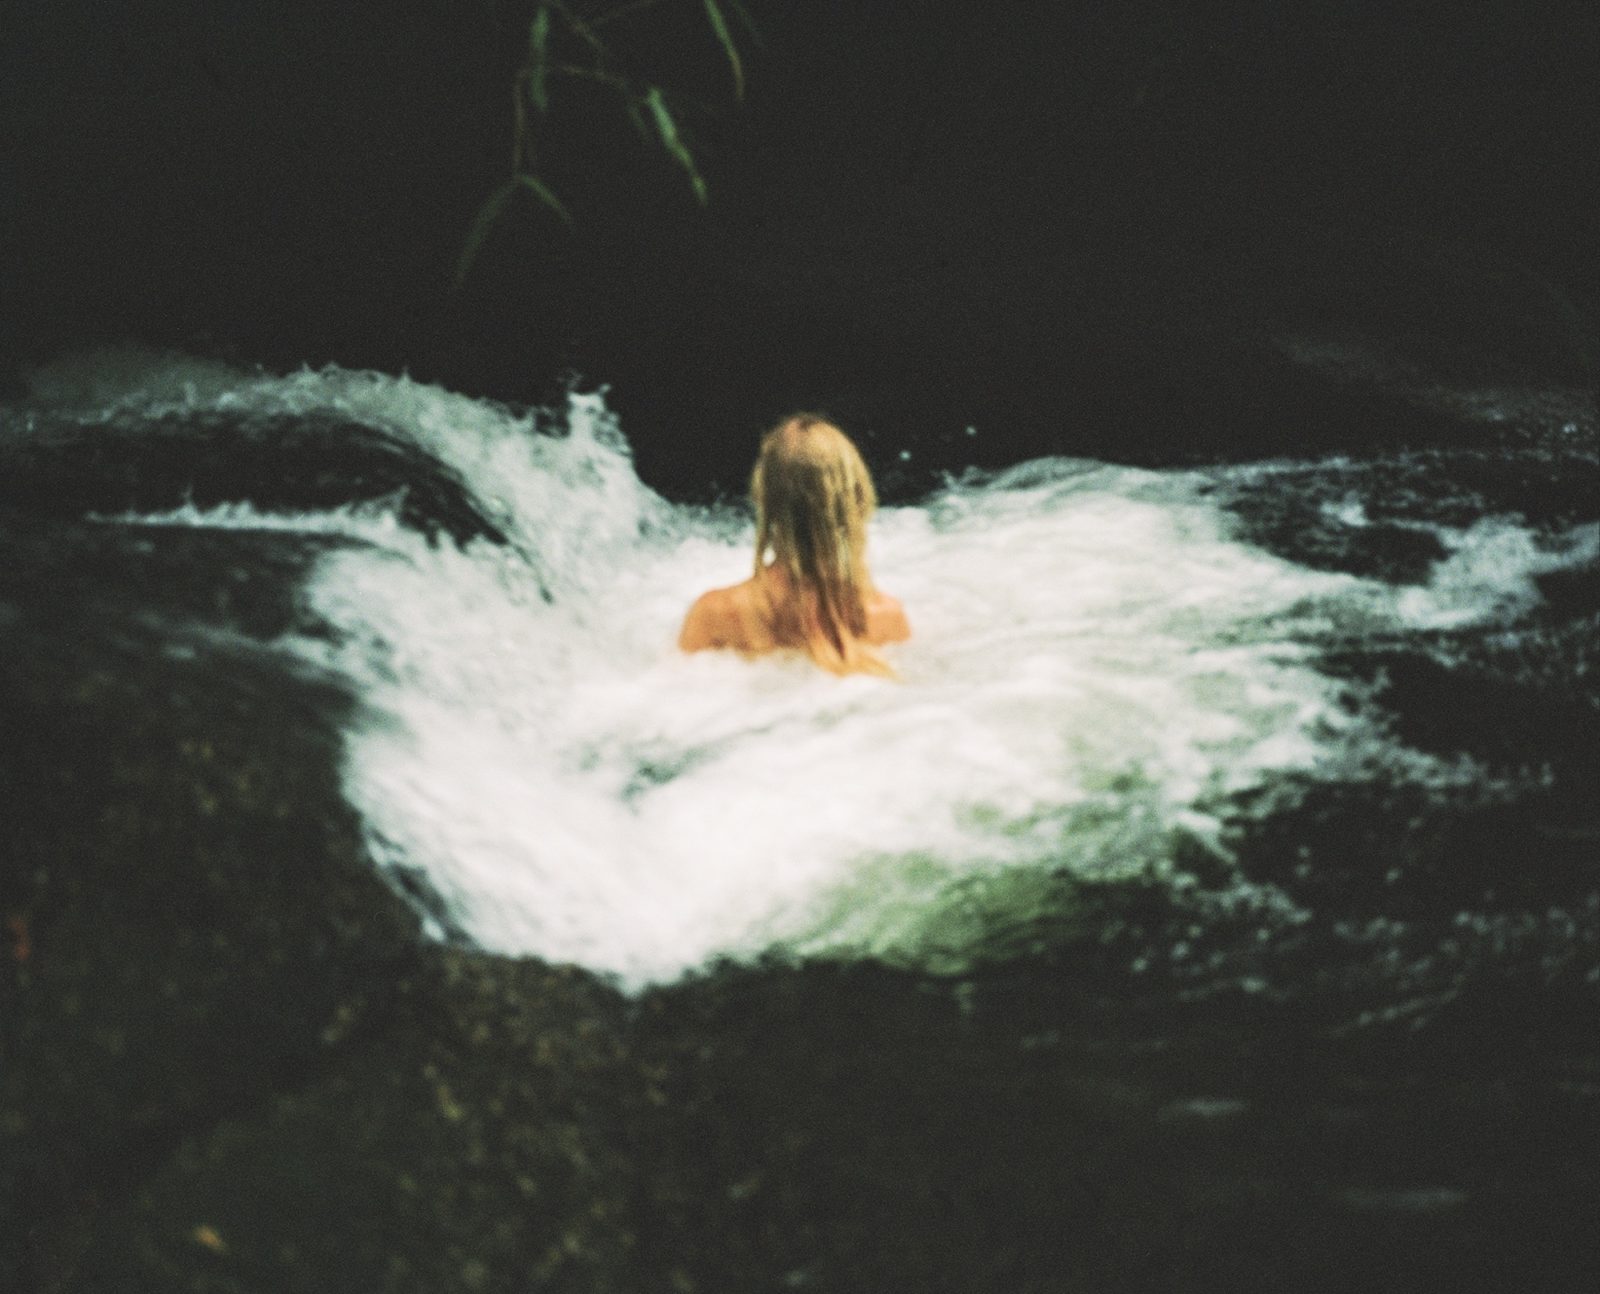 Photograph of a woman in a river, as part of the photography project Are We There by Jenni Toivonen.